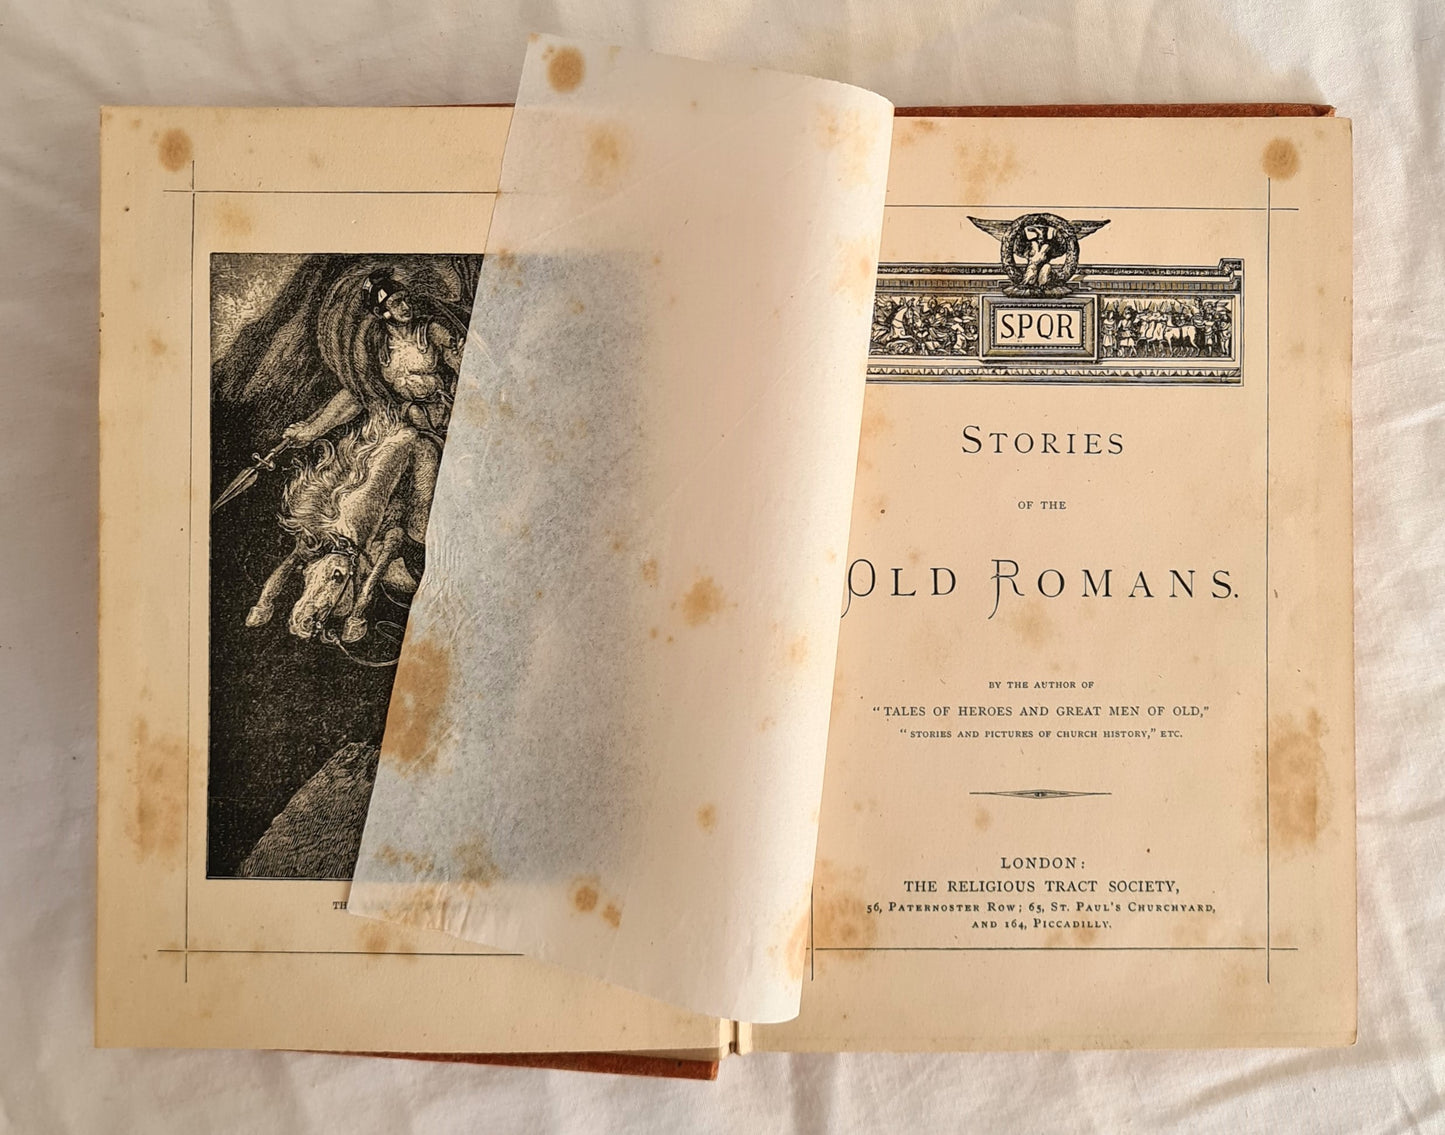 Stories of the Old Romans  By the Author of “Tales of Heroes and Great Men of Old”  by S. S. Pugh